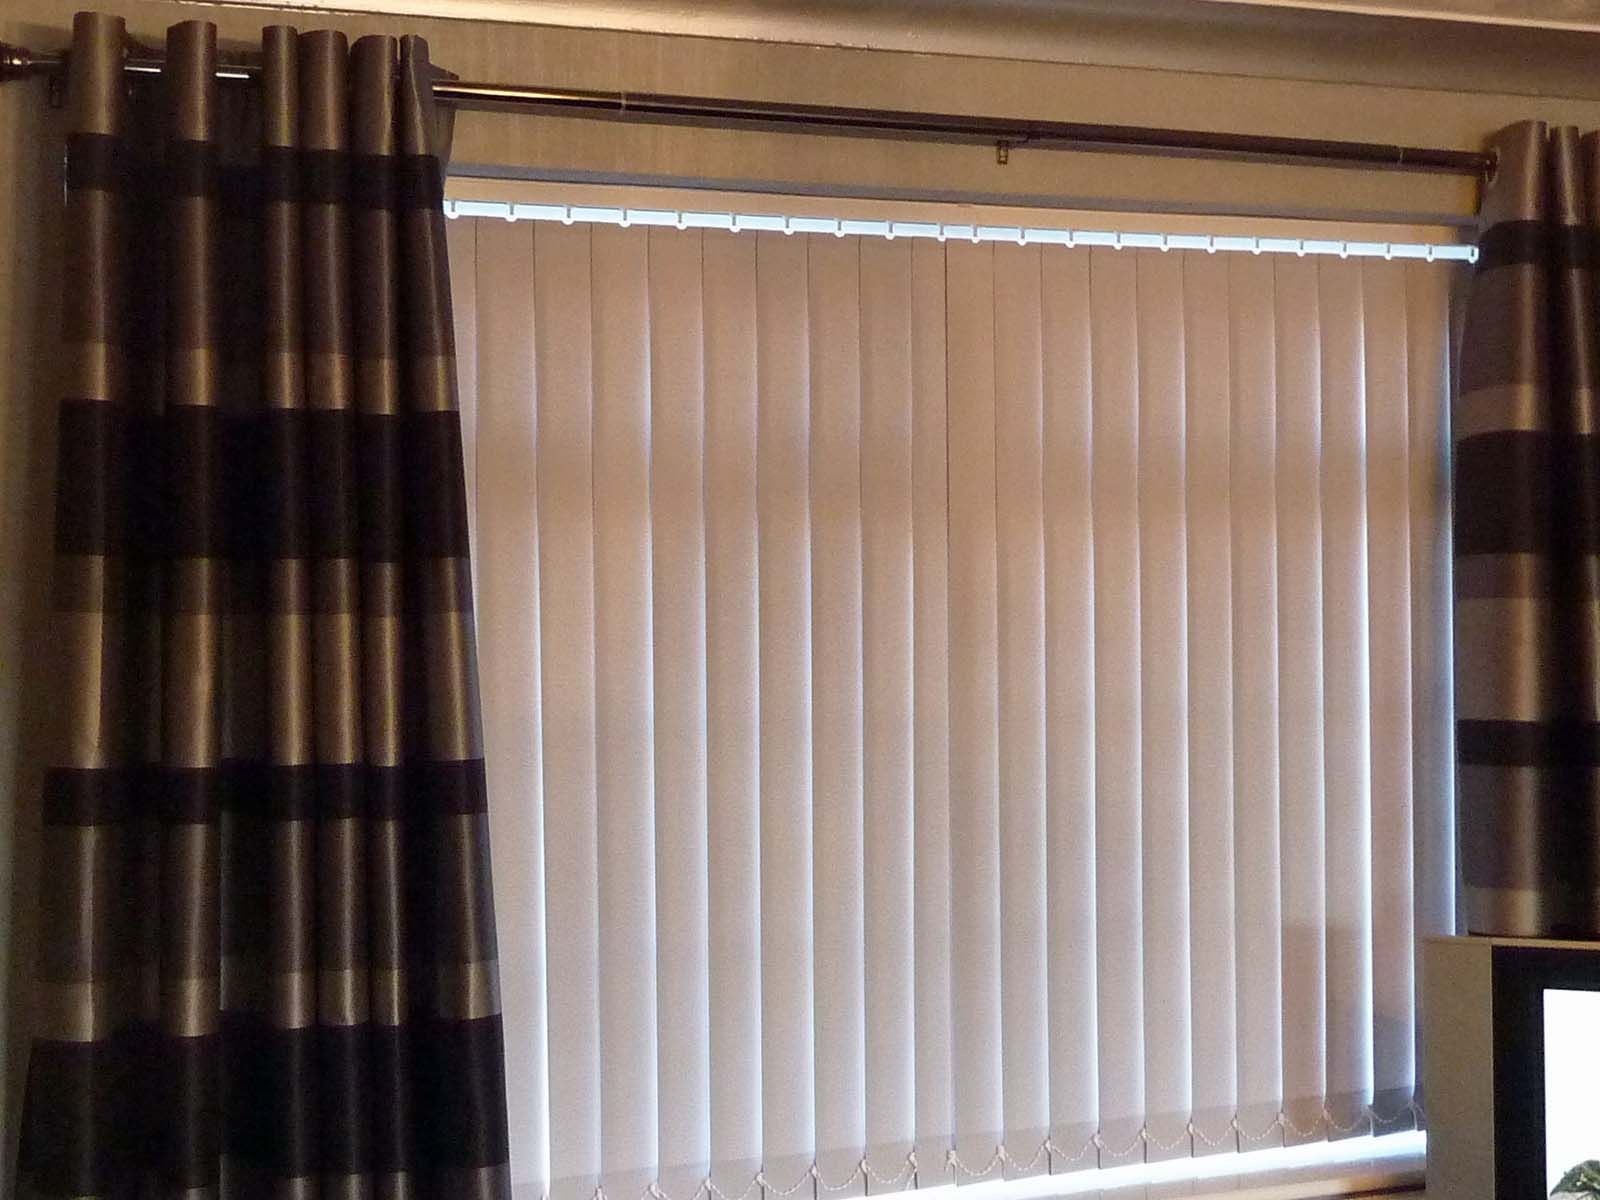 How To Hang Blackout Curtains Over Blinds Best Curtains 2017 Inside Blackout Curtains And Blinds (View 9 of 15)